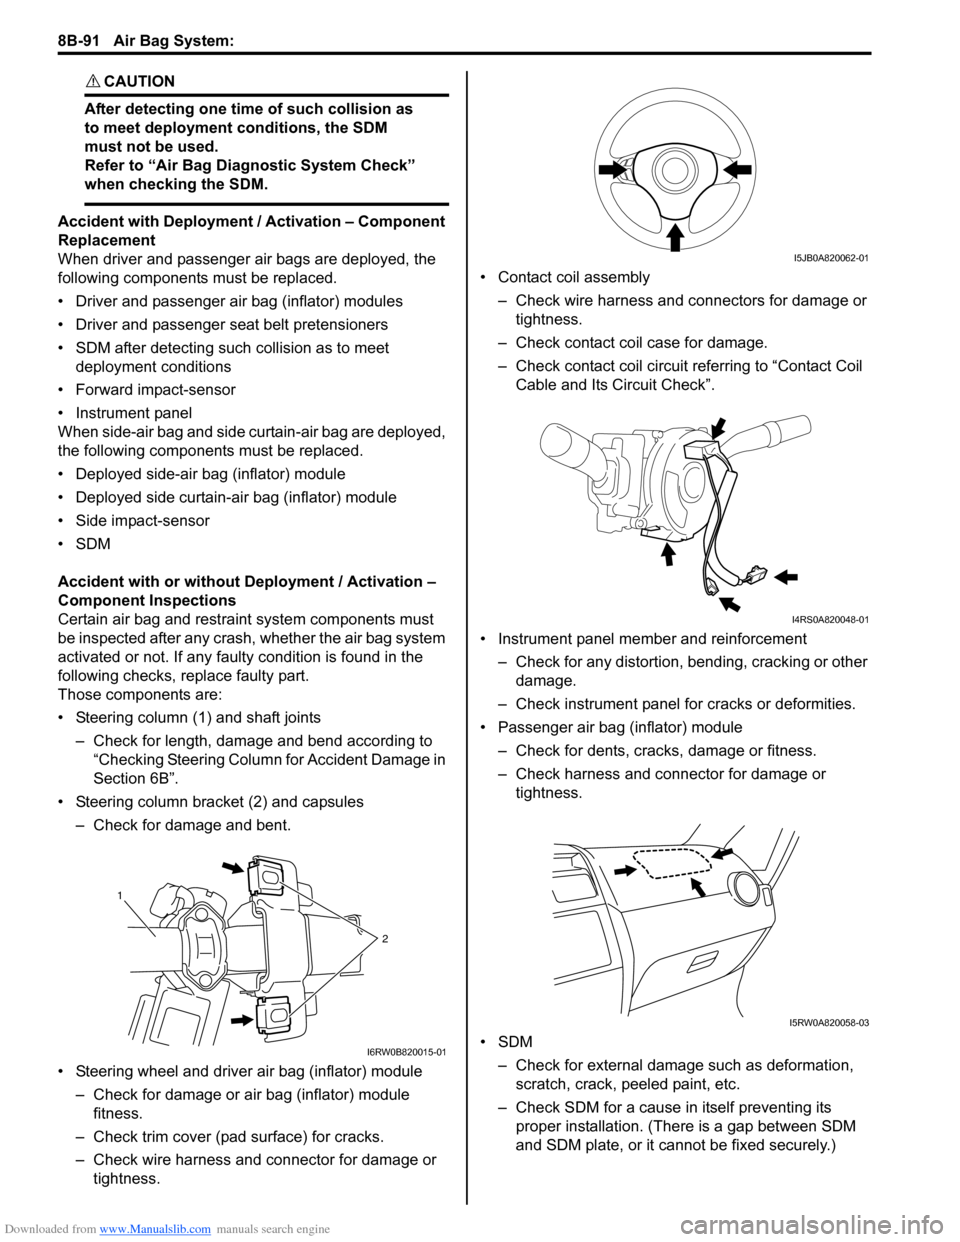 SUZUKI SX4 2006 1.G Service User Guide Downloaded from www.Manualslib.com manuals search engine 8B-91 Air Bag System: 
CAUTION! 
After detecting one time of such collision as 
to meet deployment conditions, the SDM 
must not be used.
Refer